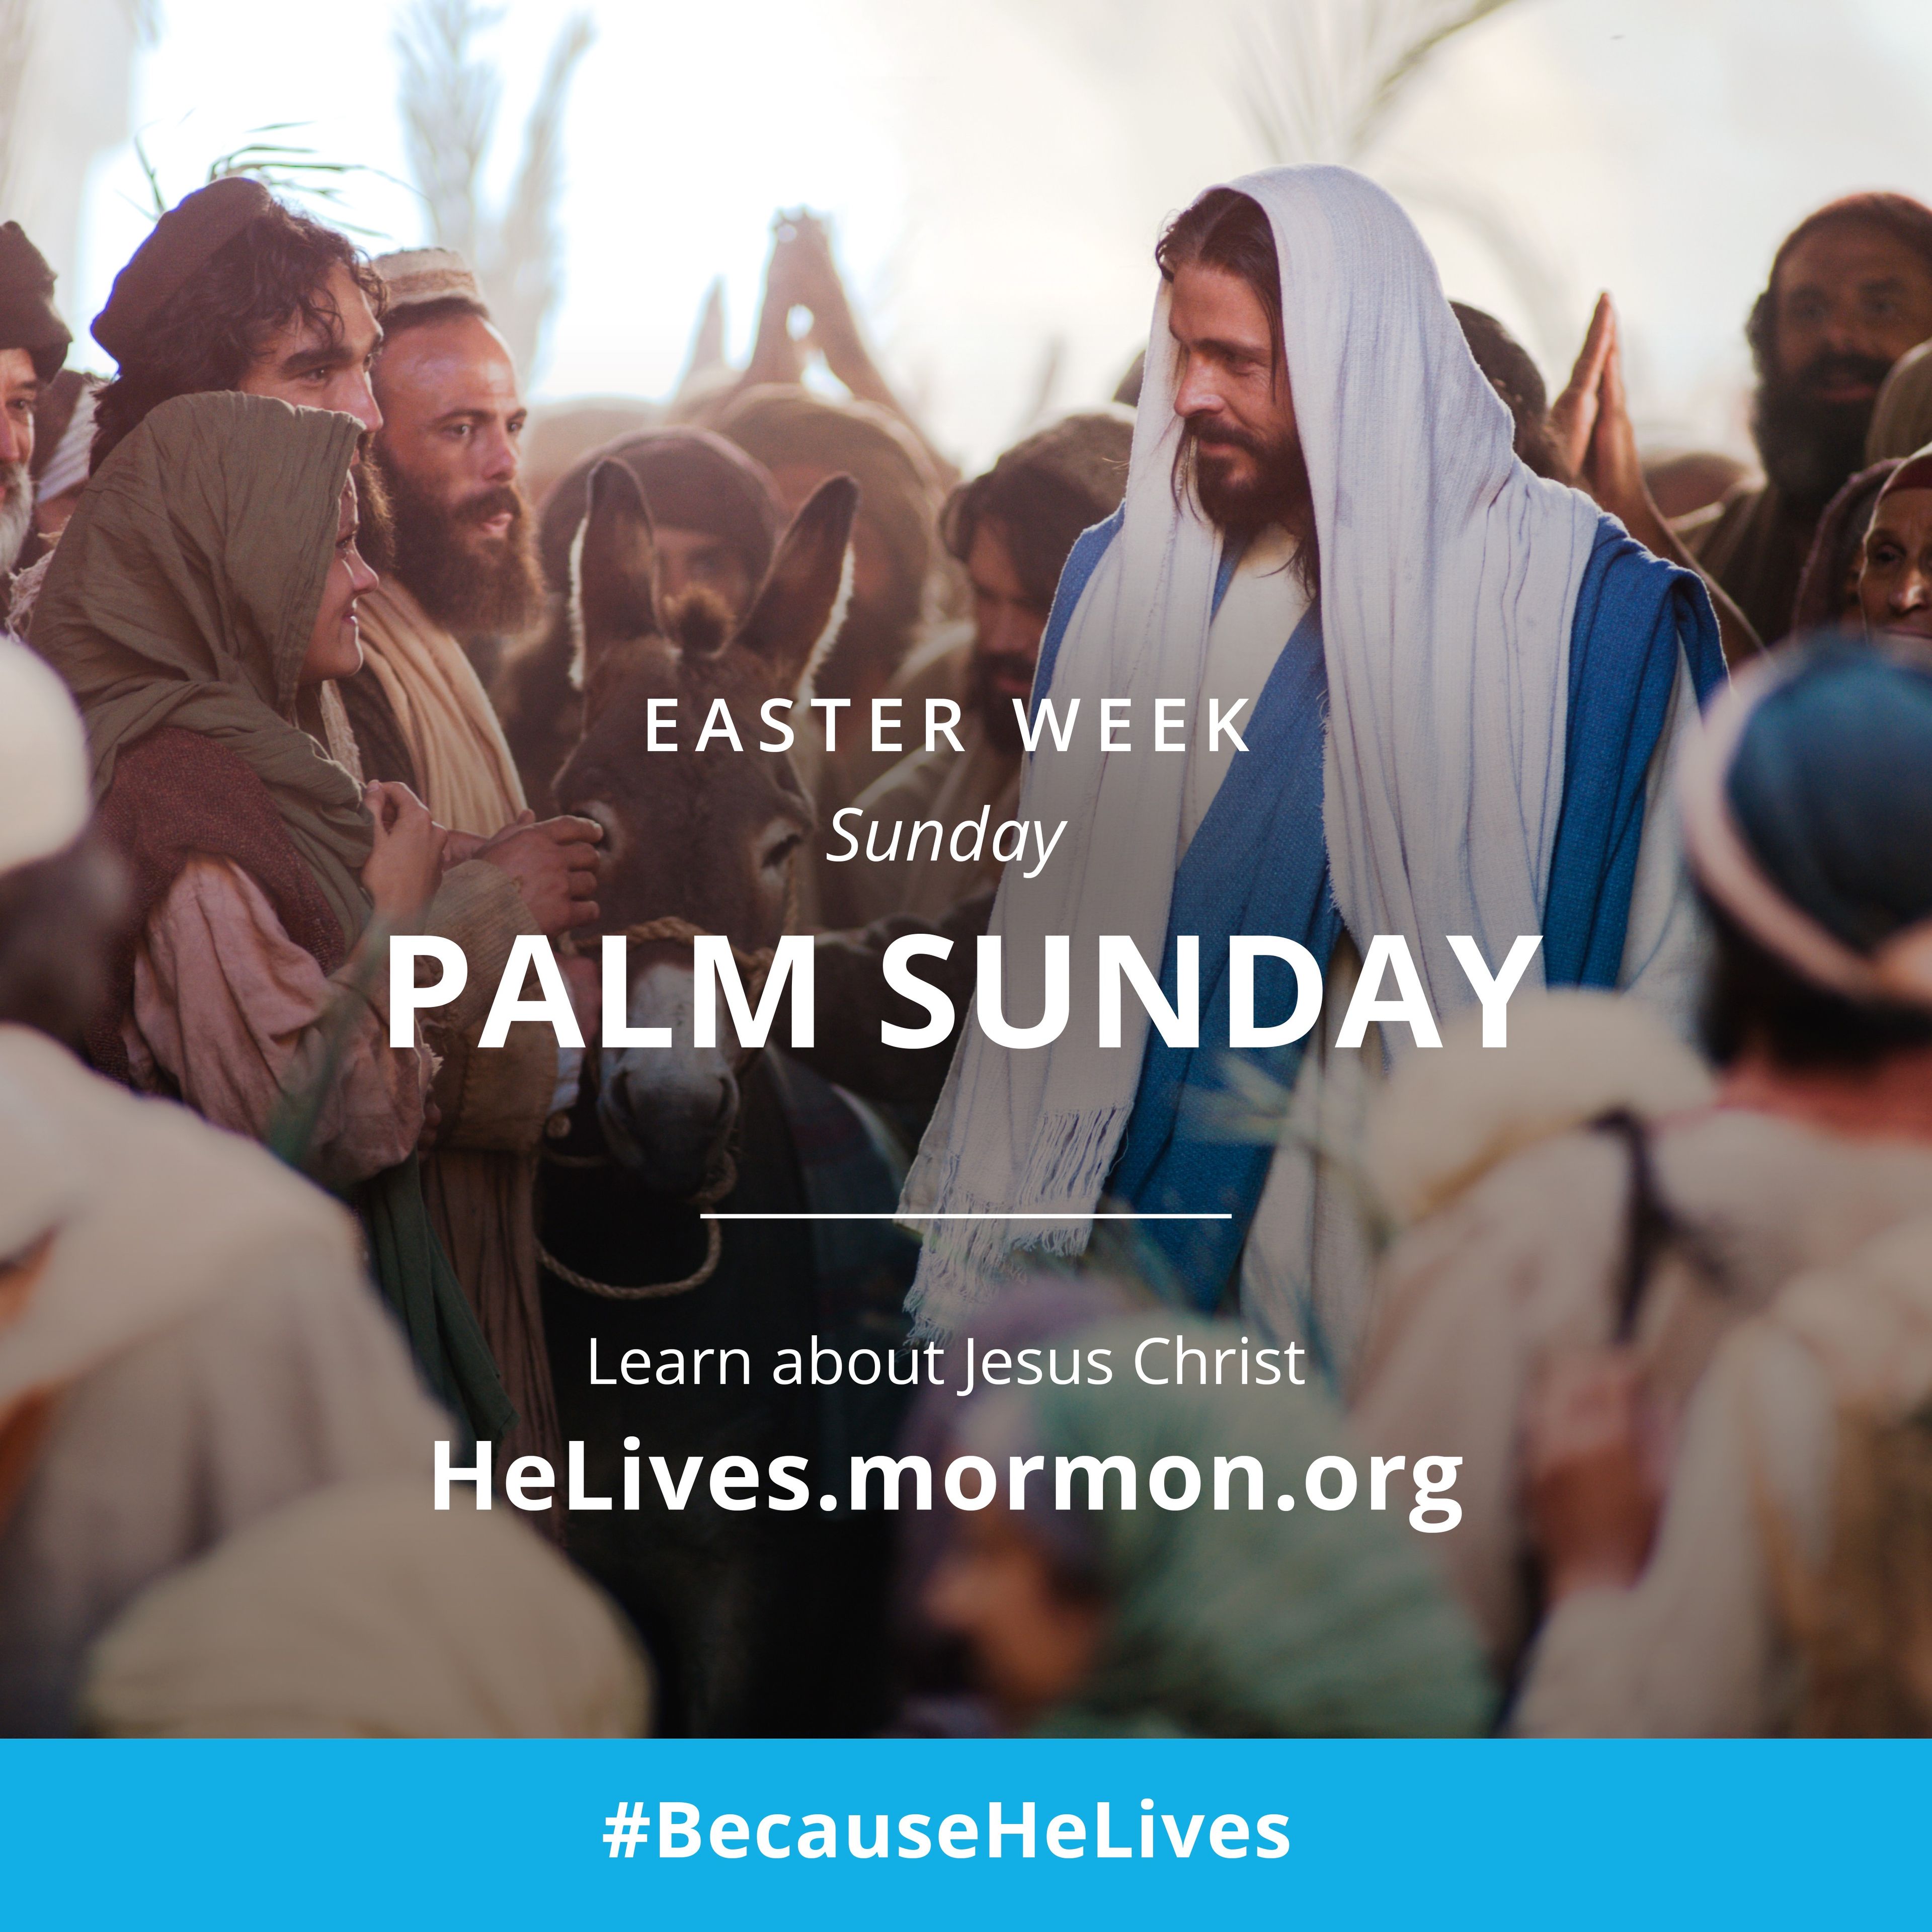 Easter week, Sunday: Palm Sunday. Learn about Jesus Christ. #BecauseHeLives, HeLives.mormon.org